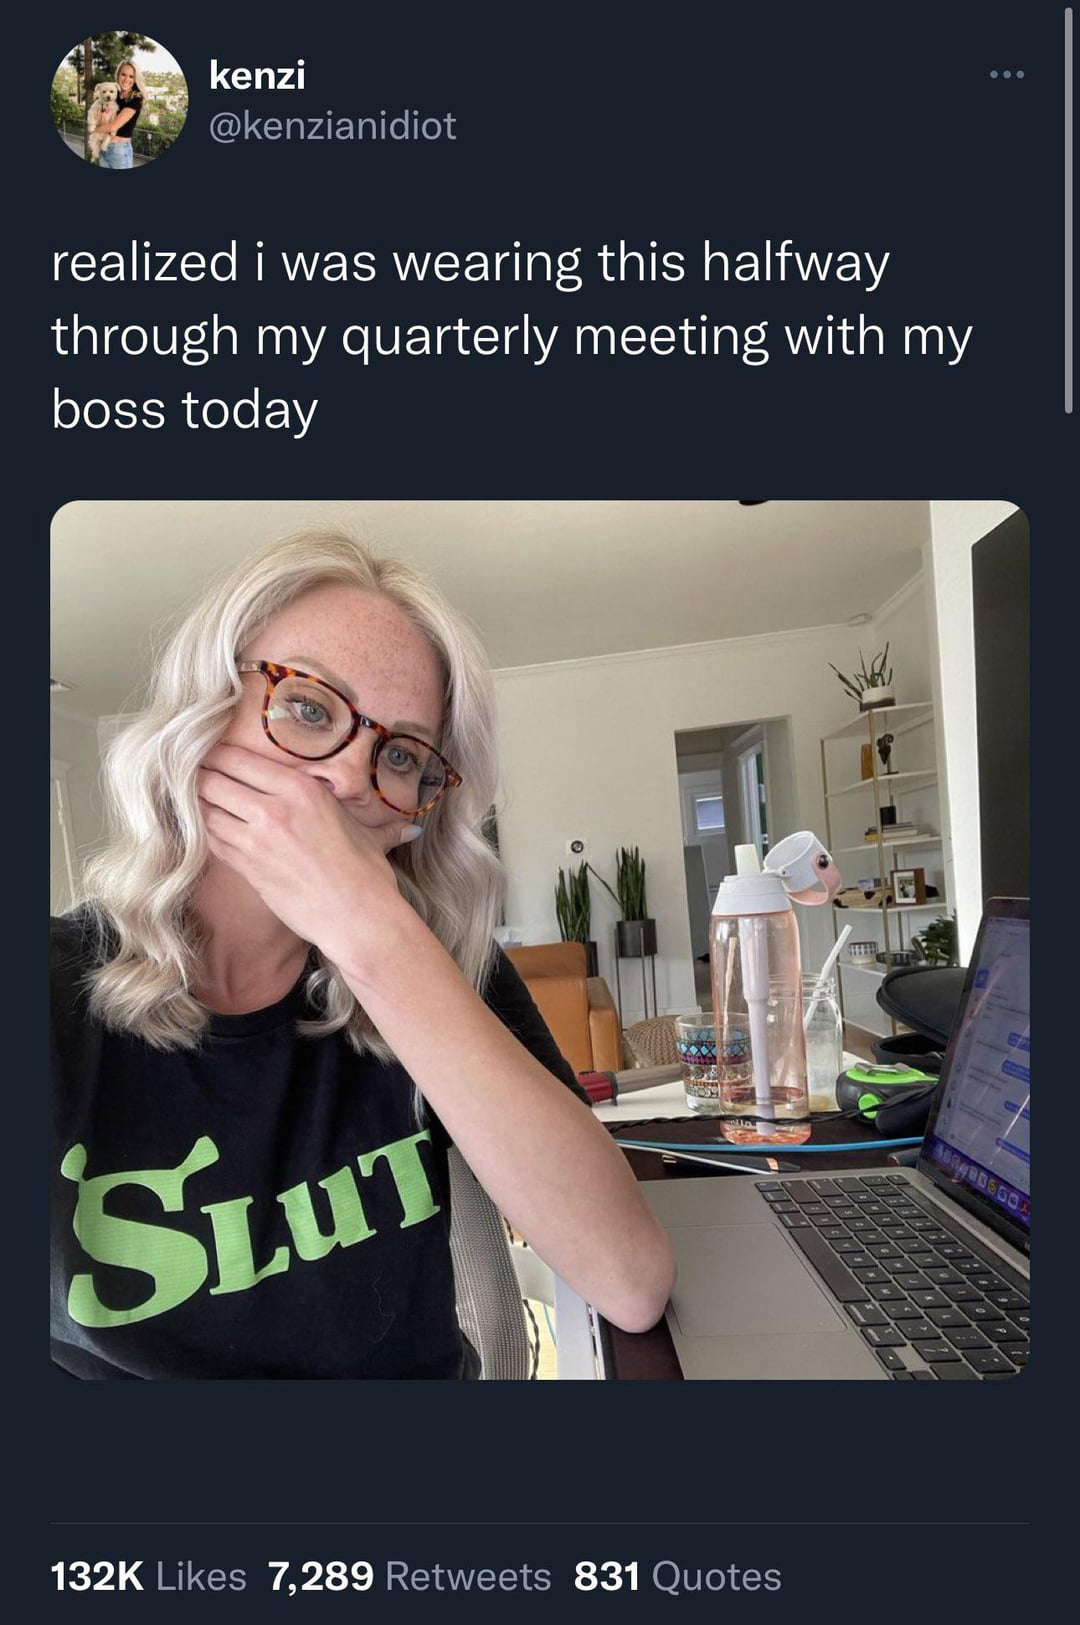 funniest tweets of the week - glasses - kenzi realized i was wearing this halfway through my quarterly meeting with my boss today Slut 7,289 831 Quotes